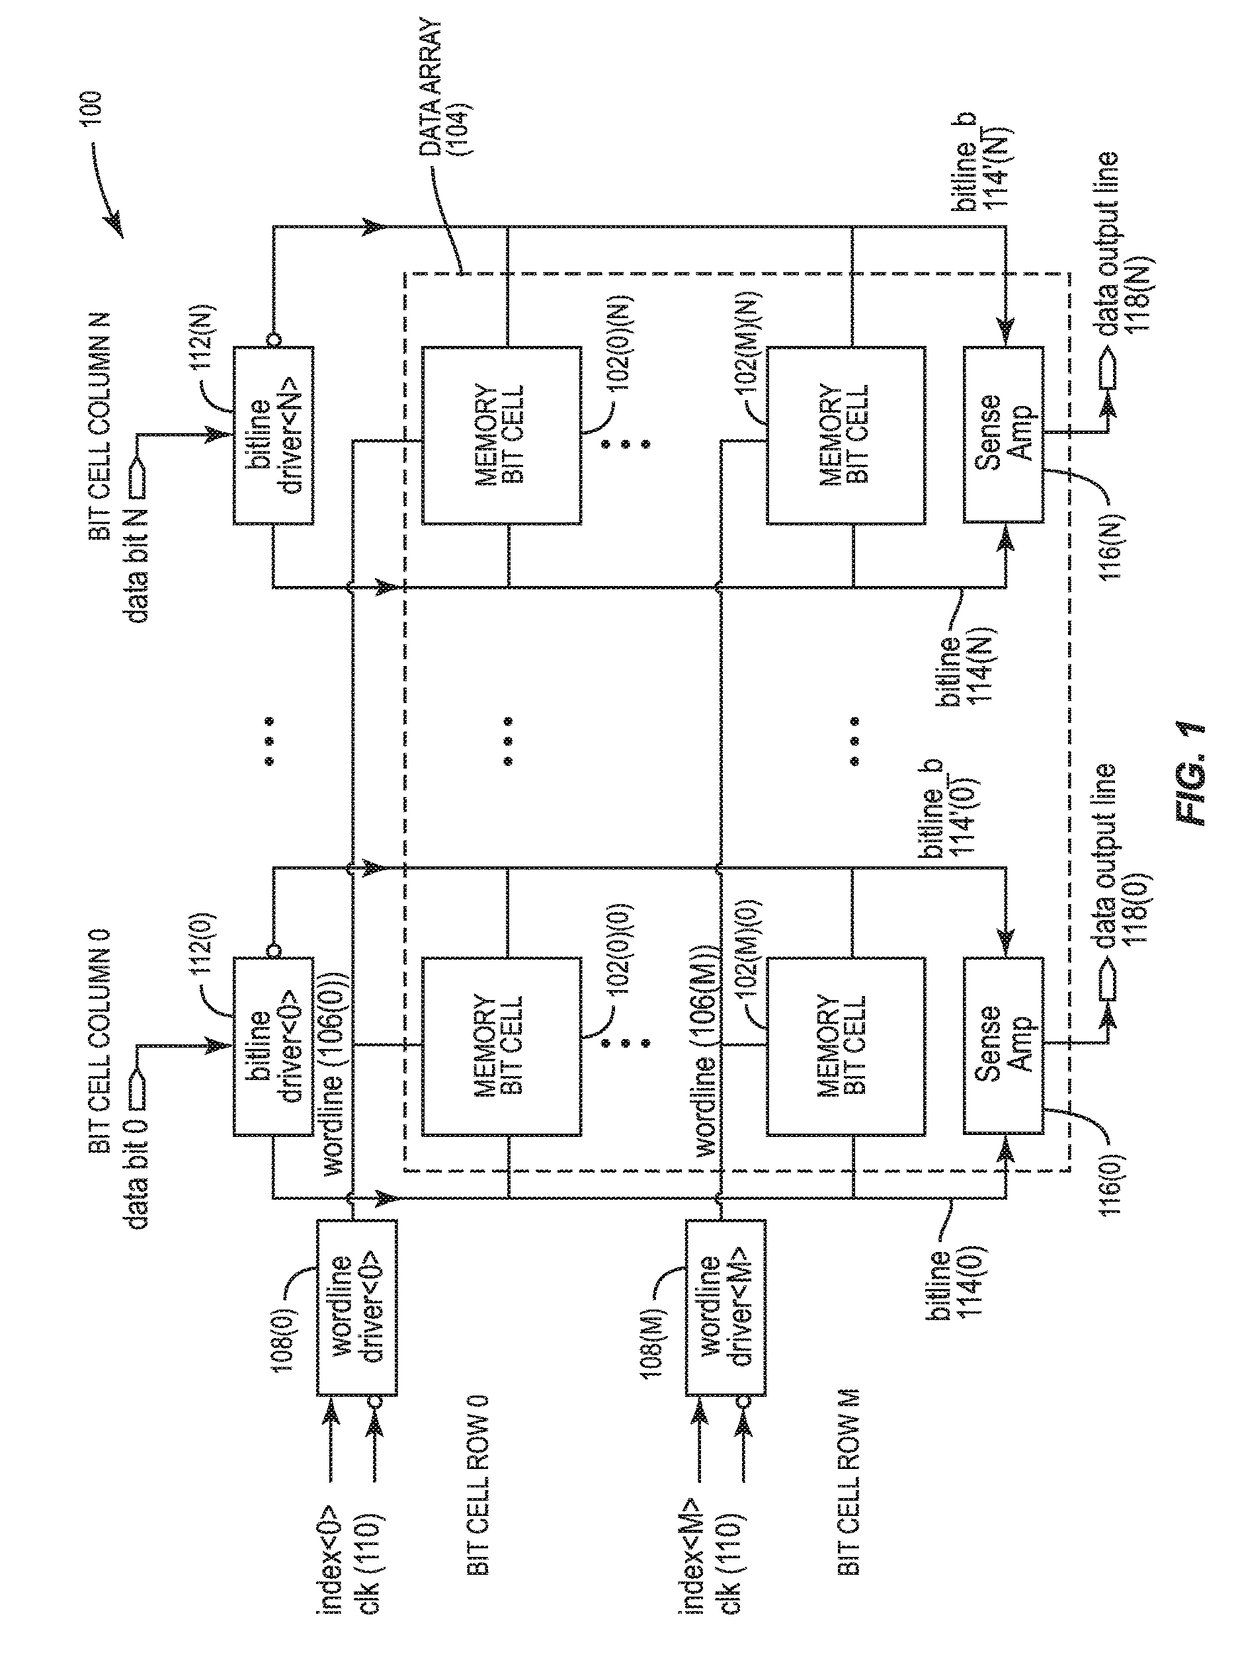 Wordline negative boost write-assist circuits for memory bit cells employing a P-type field-effect transistor (PFET) write port(s), and related systems and methods